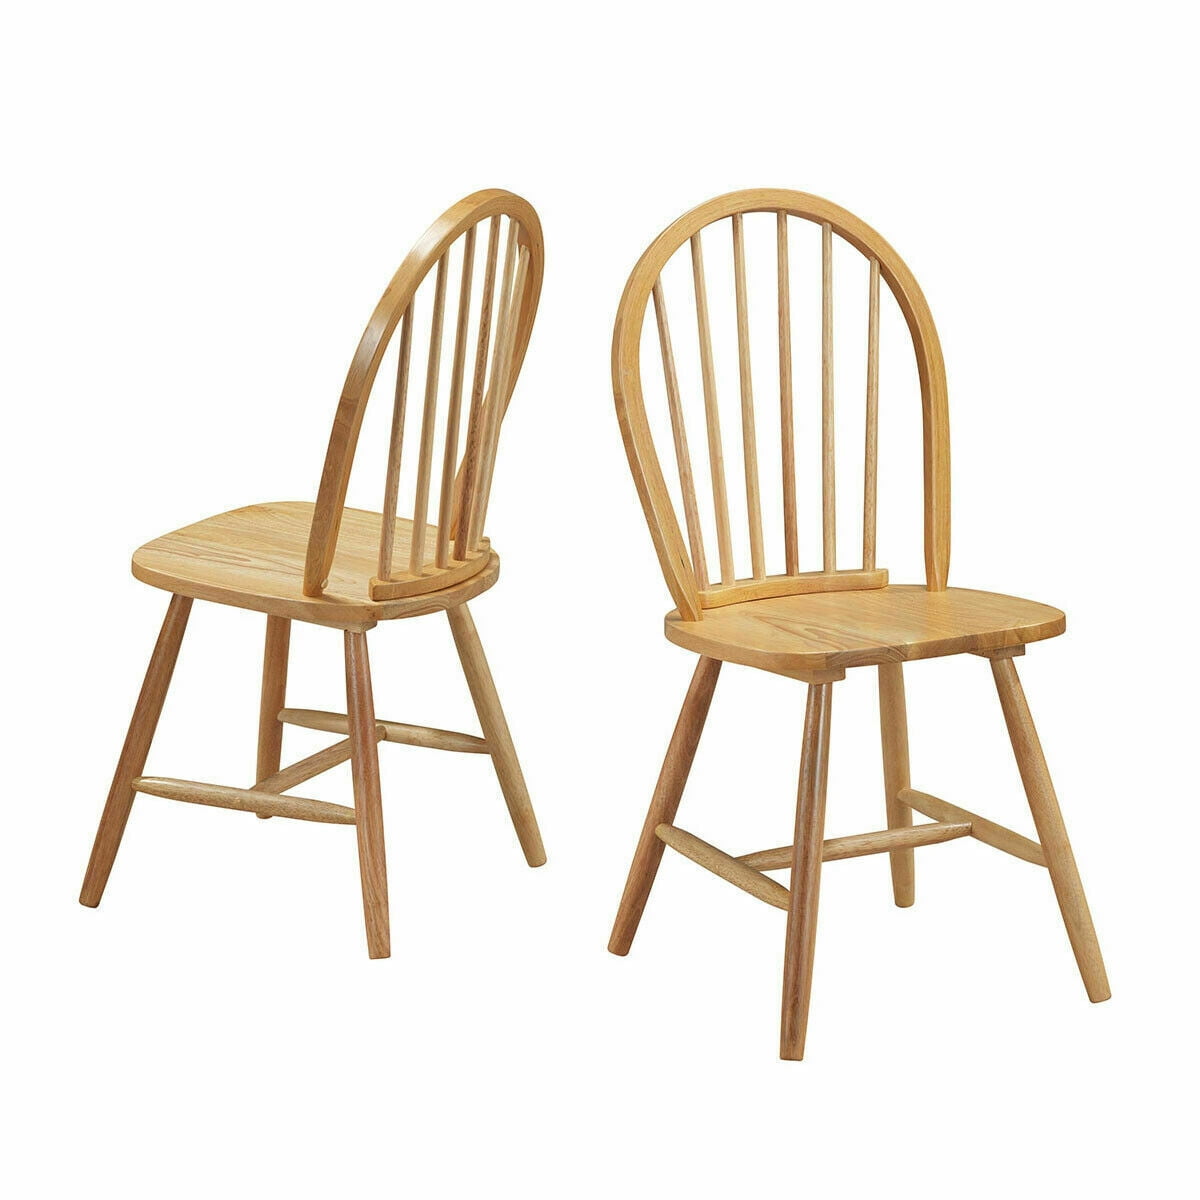 Set of 2 Windsor Chairs Wood Armless Dining Room Spindle Back Kitchen